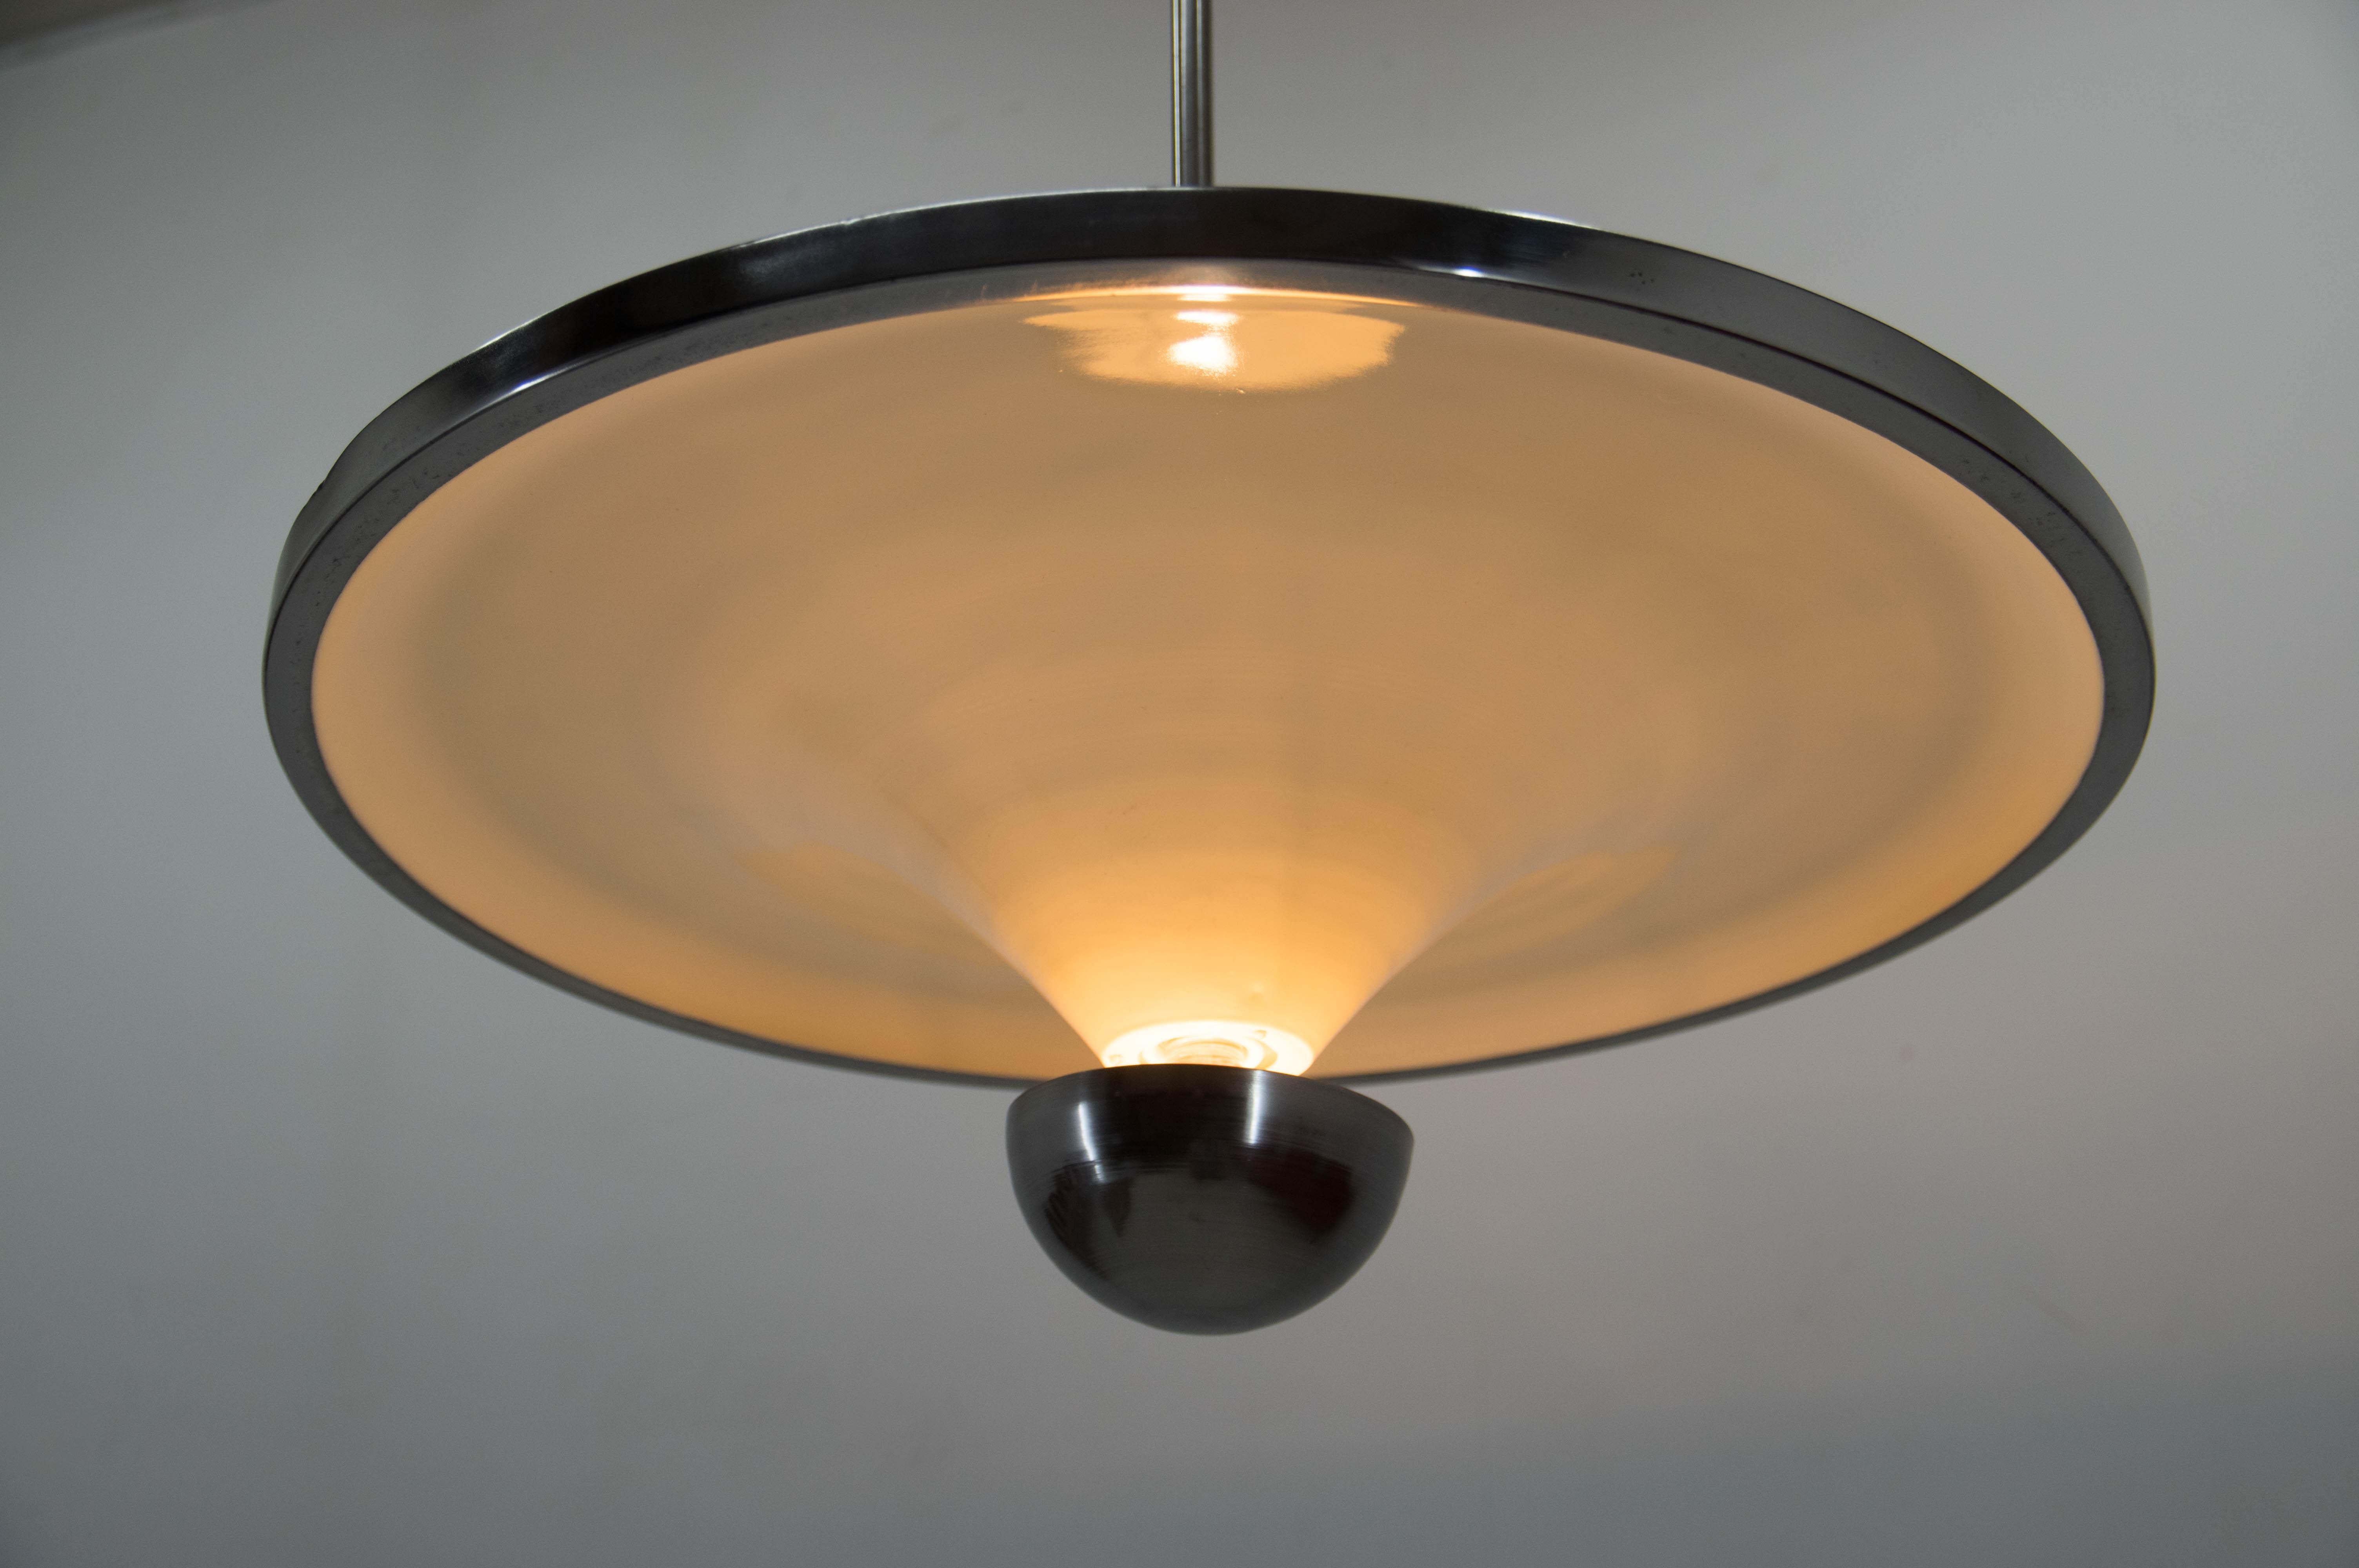 Rare Bauhaus Chandelier with Indirect Light by IAS, 1920s For Sale 6